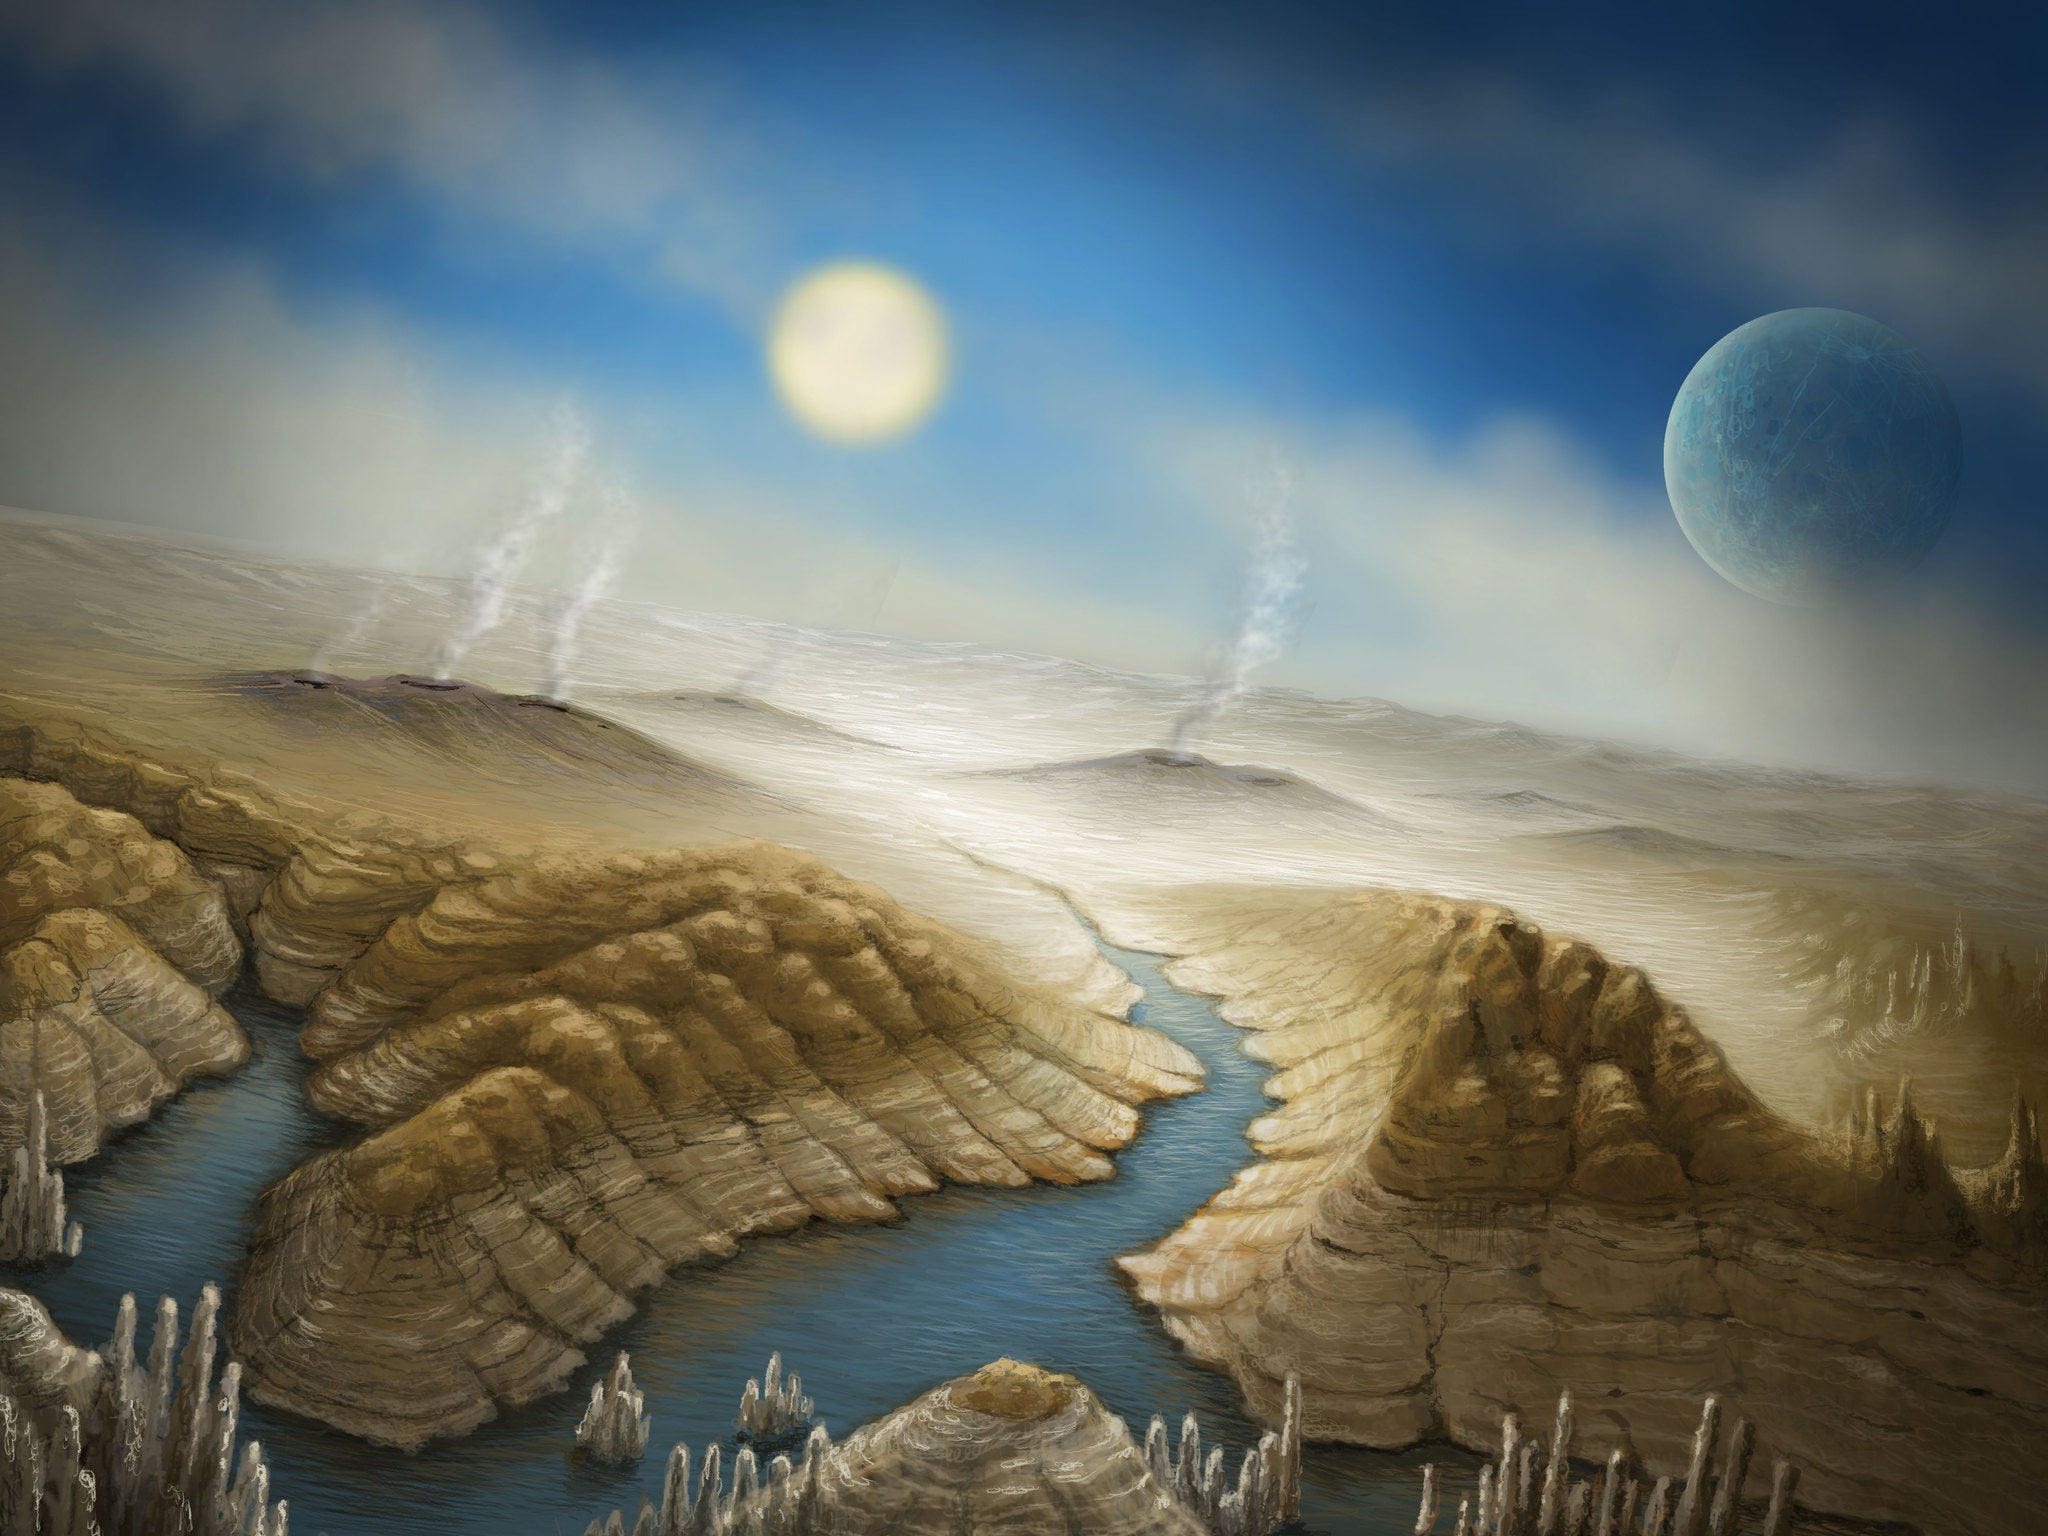 This artist's impression shows what the surface of Kepler 452b could look like, with active volcanoes and liquid water